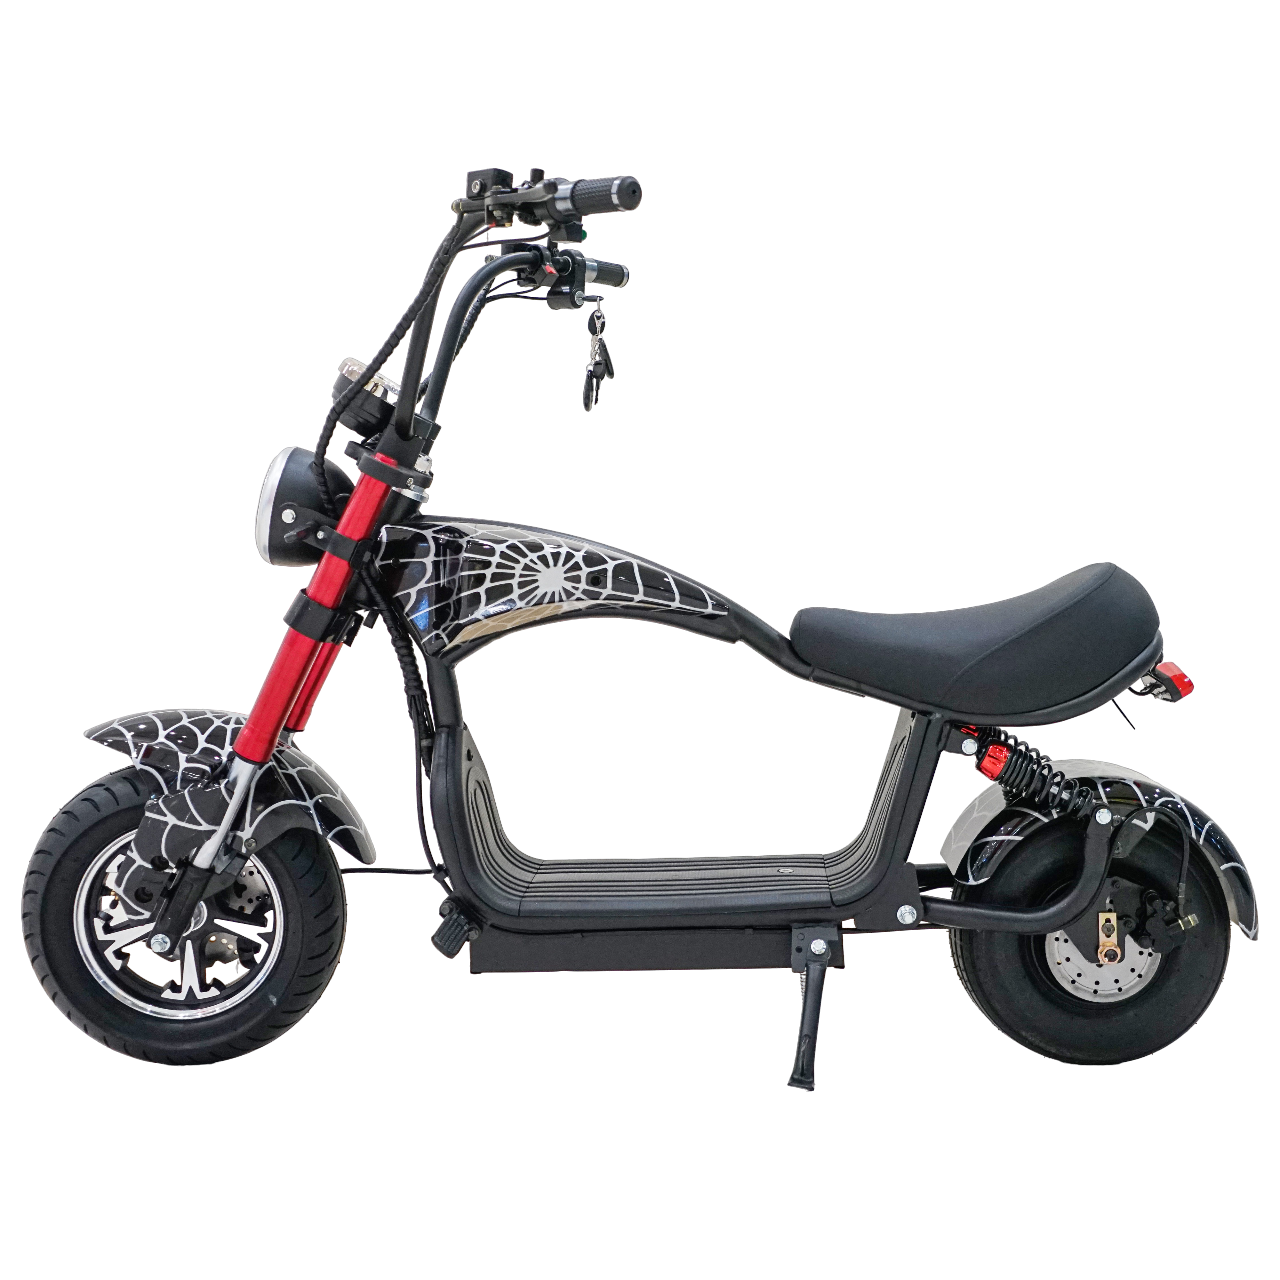 CRONY Small X1 48V15A/1200W Harley Car Electric bicycle Electric Motorcycle Ebike